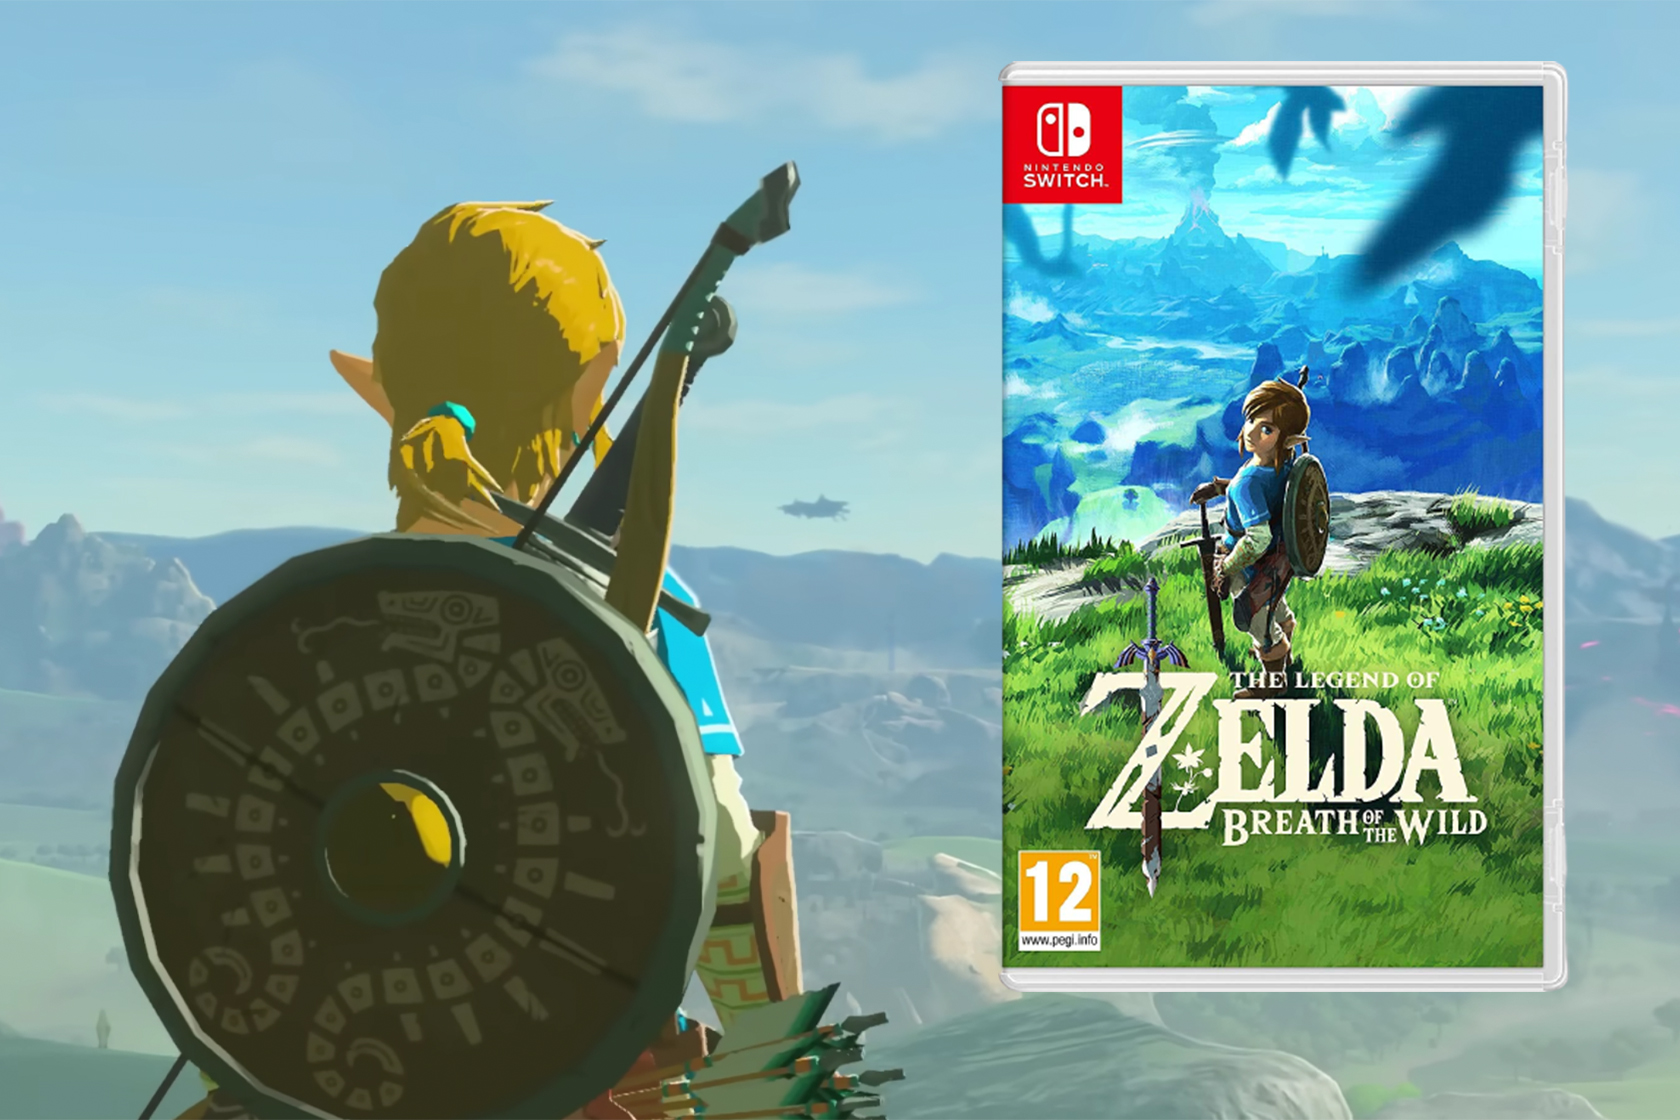 The Legend of Zelda: Get this classic Nintendo Switch game for 31% off -  Reviewed